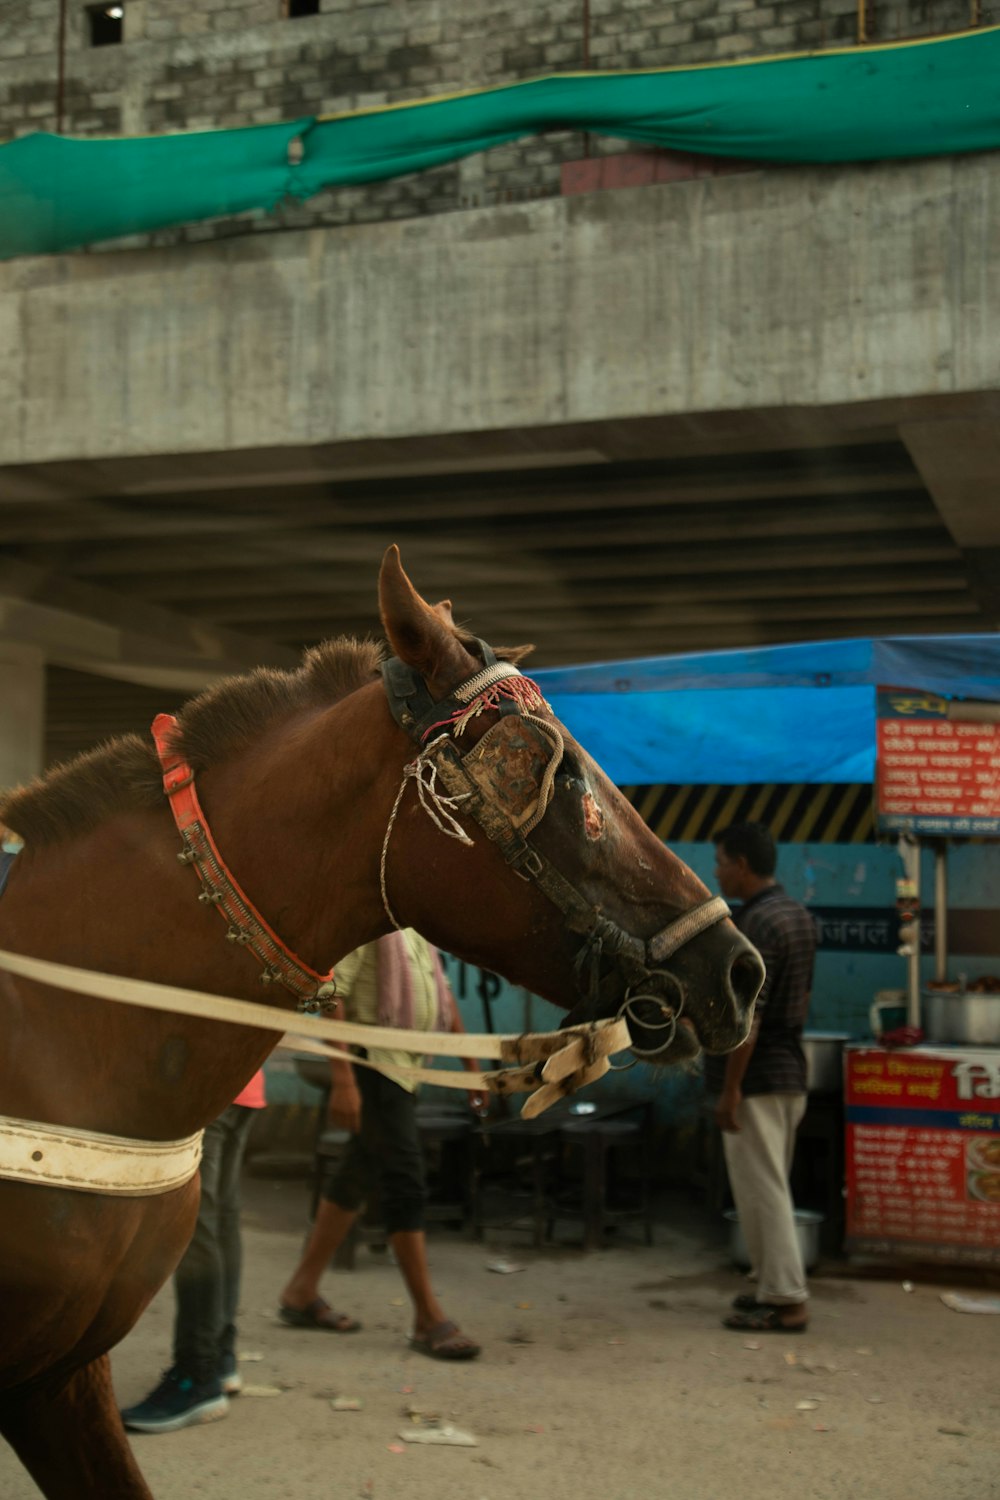 a horse tied up to a pole in a city